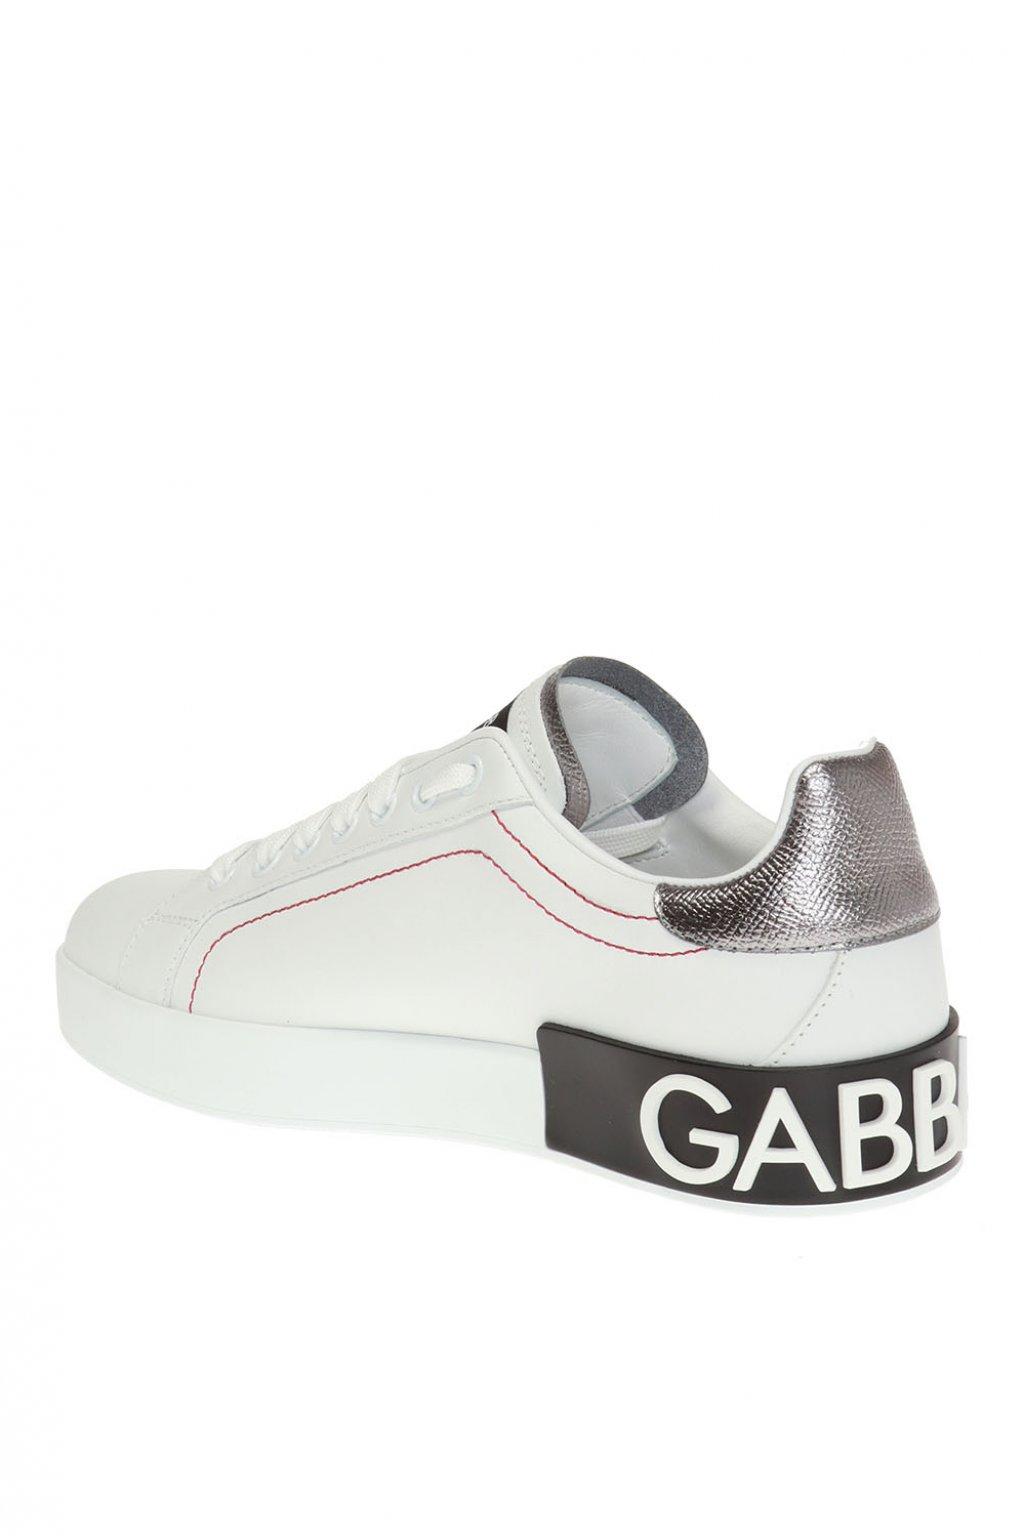 Dolce & Gabbana Leather Branded Sneakers in White - Save 31% - Lyst